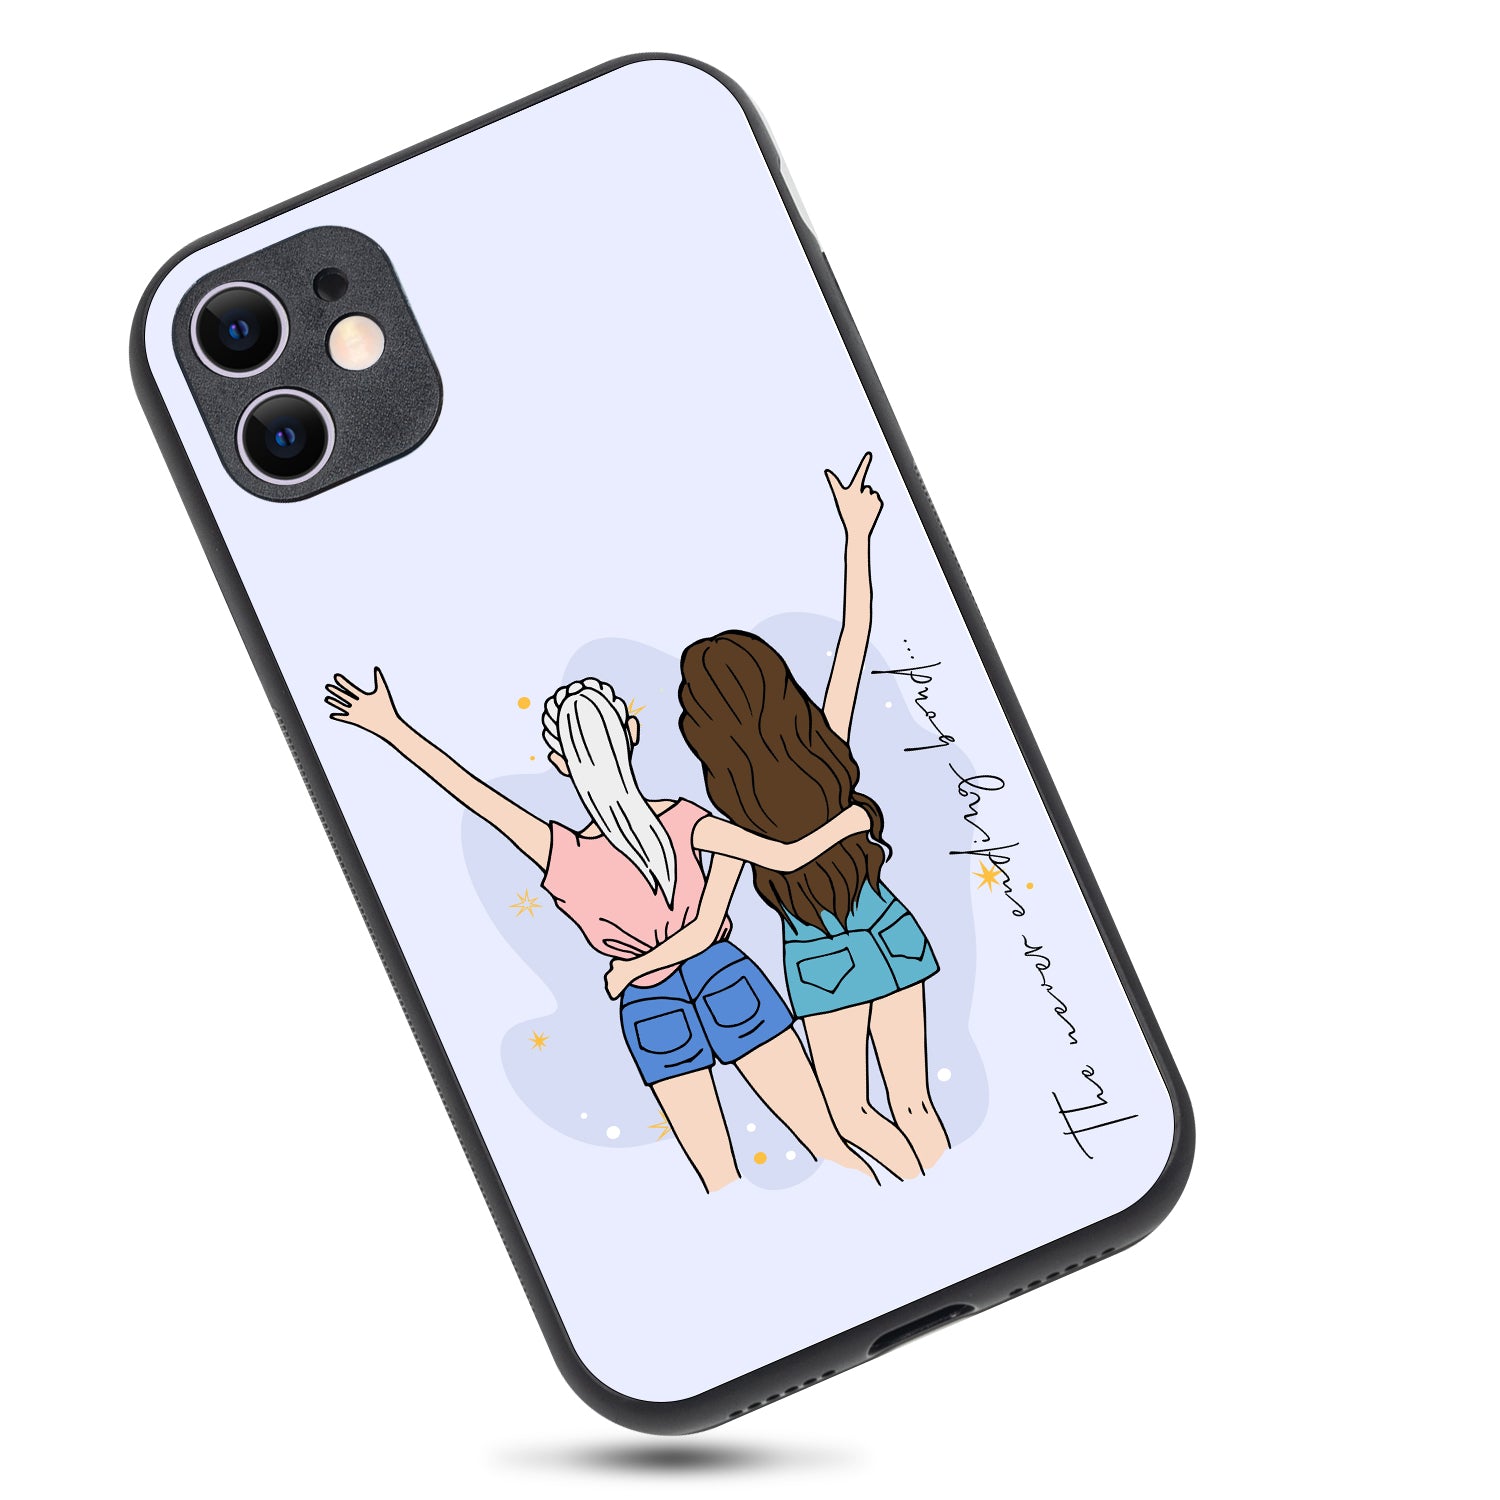 Girl Bff iPhone 11 Case